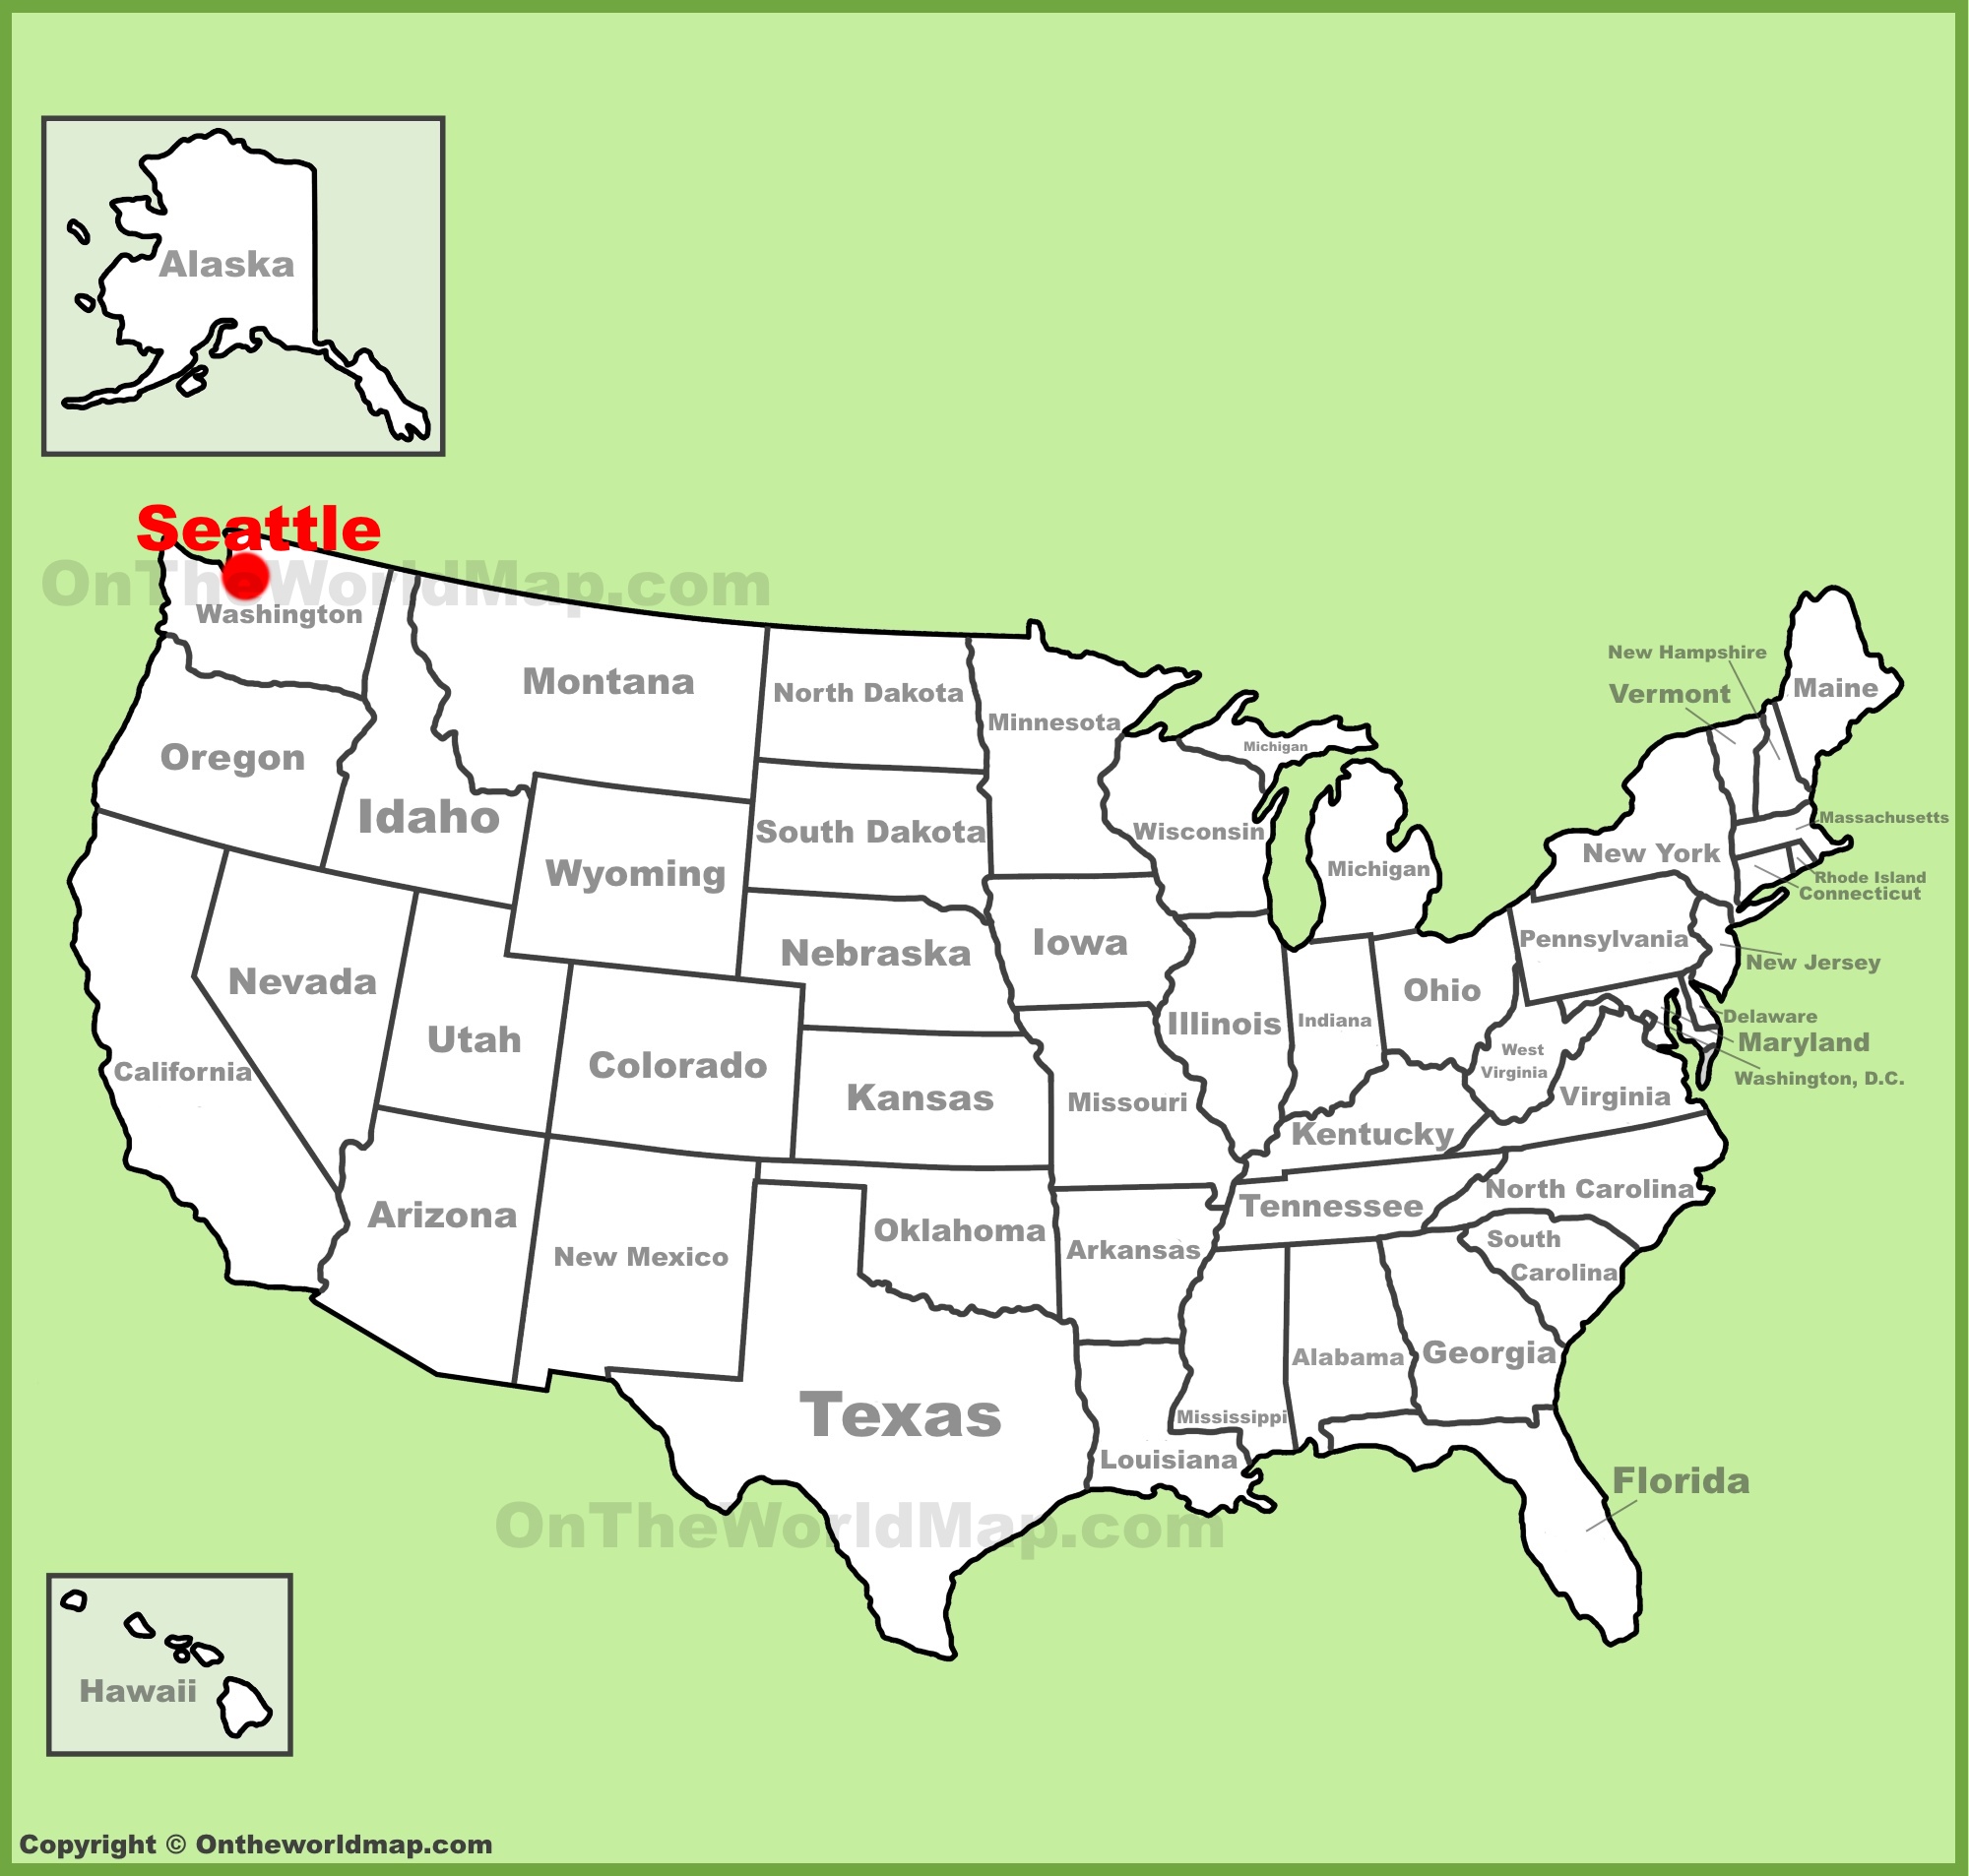 Seattle Location On The U S Map